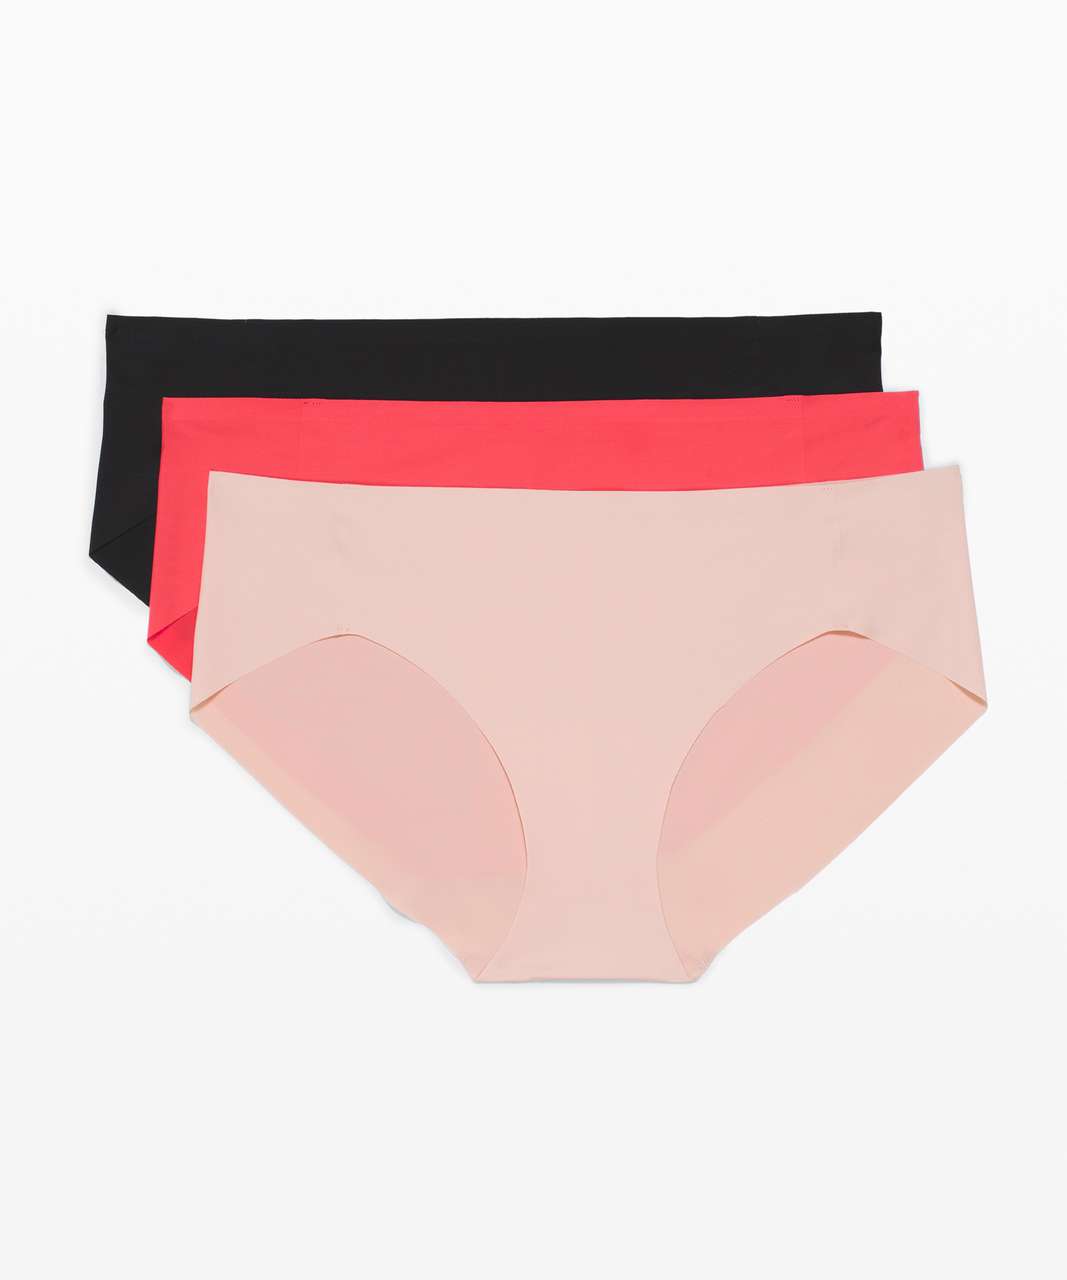 Lululemon Smooth Seamless Hipster 3 Pack - Black / Watermelon Red / Misty Shell